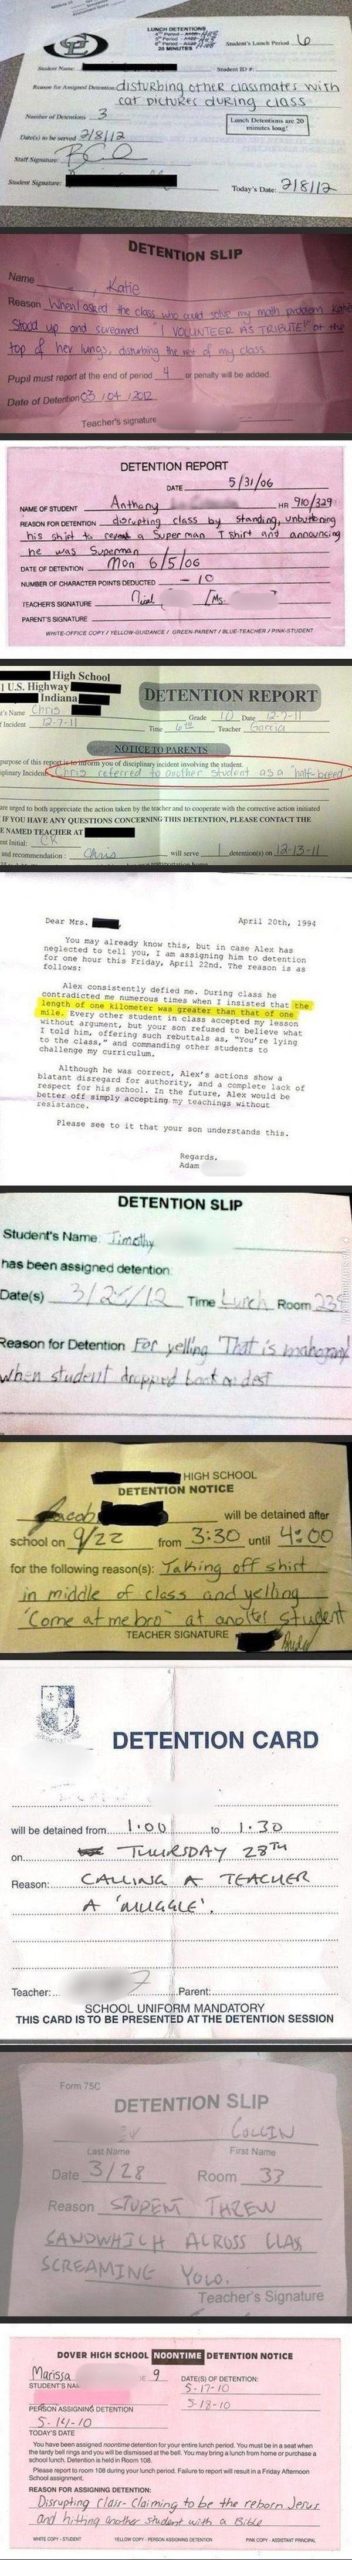 Best+reasons+to+get+detention.